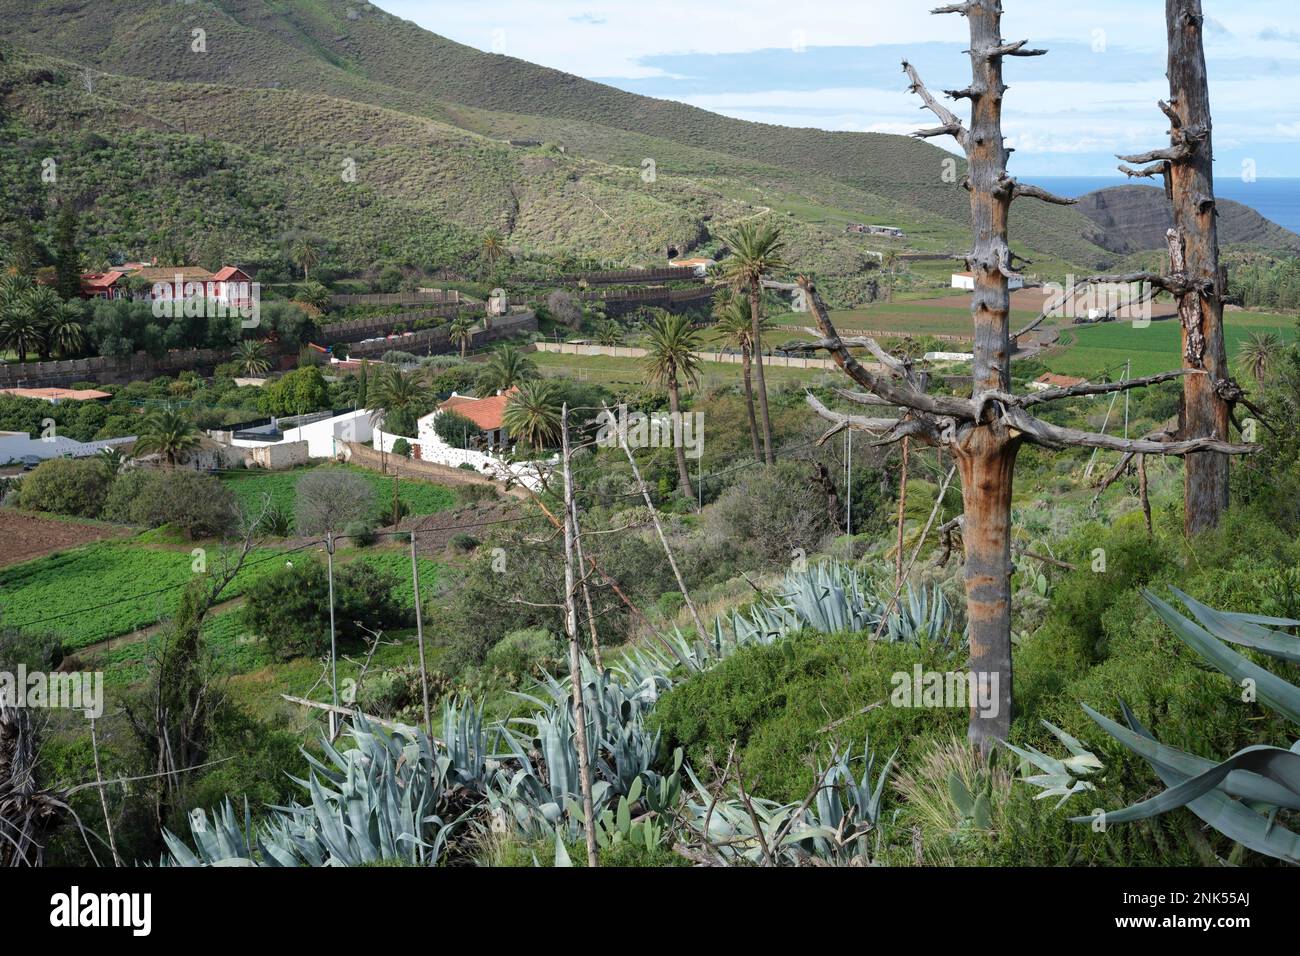 A fruitful valley with typical farms and fields in Gran Canaria island Stock Photo